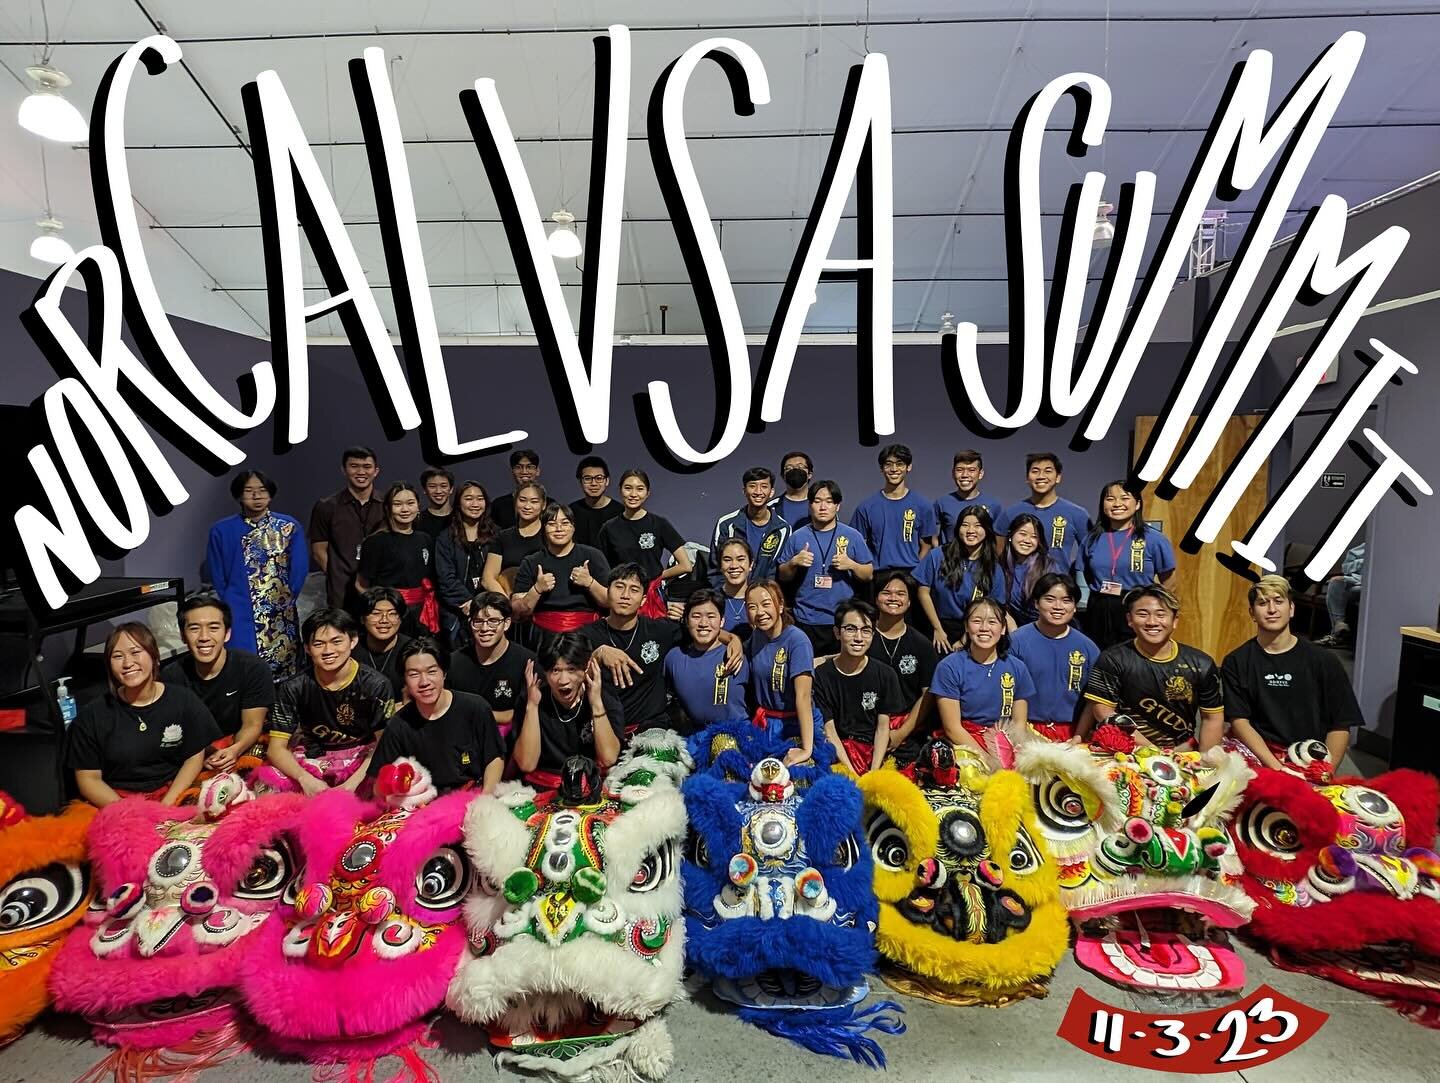 A lil throwback to our NorCal UVSA (@norcaluvsa) Summit XV collab performance with @ucm.goldenturtlelda, @vsaatucdliondance, and @sjsuvsa.ldc!! The hours of behind-the-scenes planning, cooking, and practice definetely paid off- thank you for everyone